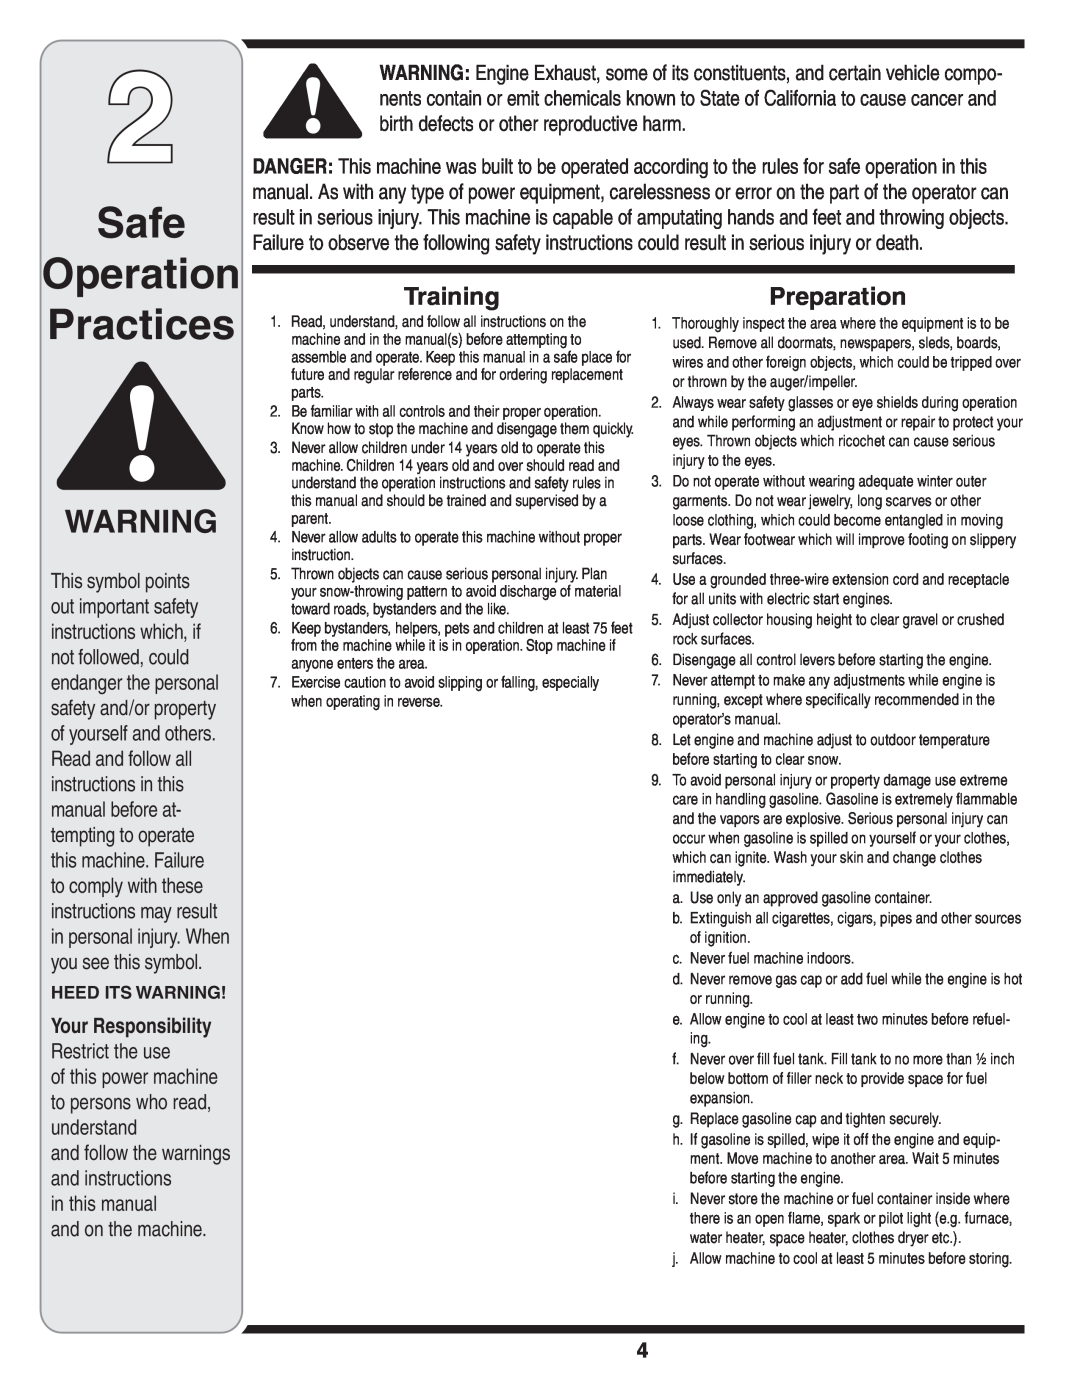 Cub Cadet WE 26 Safe Operation, Practices, TrainingPreparation, in this manual and on the machine, Heed Its Warning 